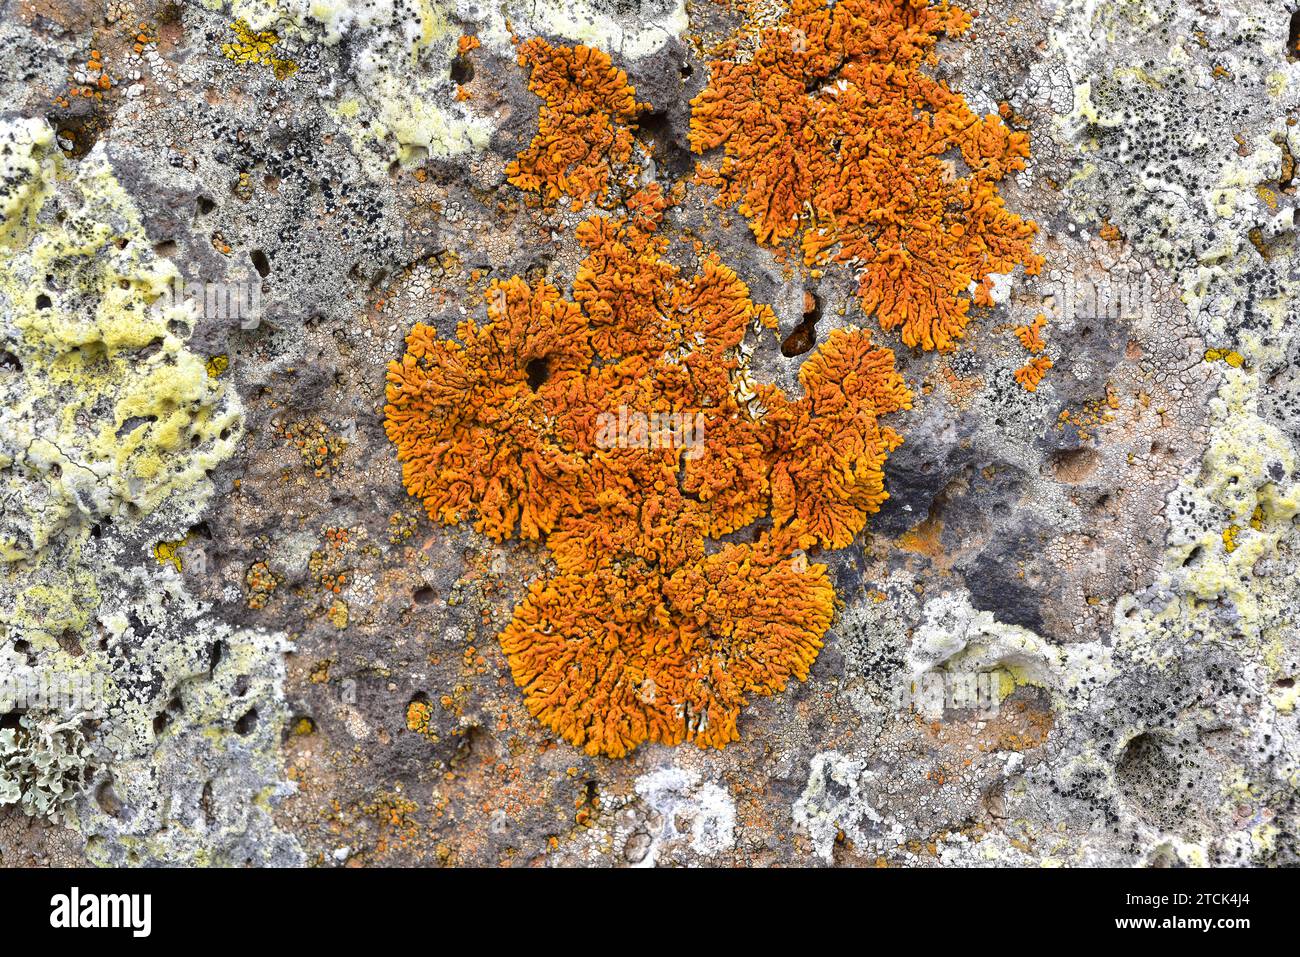 Xanthoria resendei is a foliose lichen with red apothecia growing in volcanic rock. This photo was taken in Lanzarote Island, Canary Islands, Spain. Stock Photo